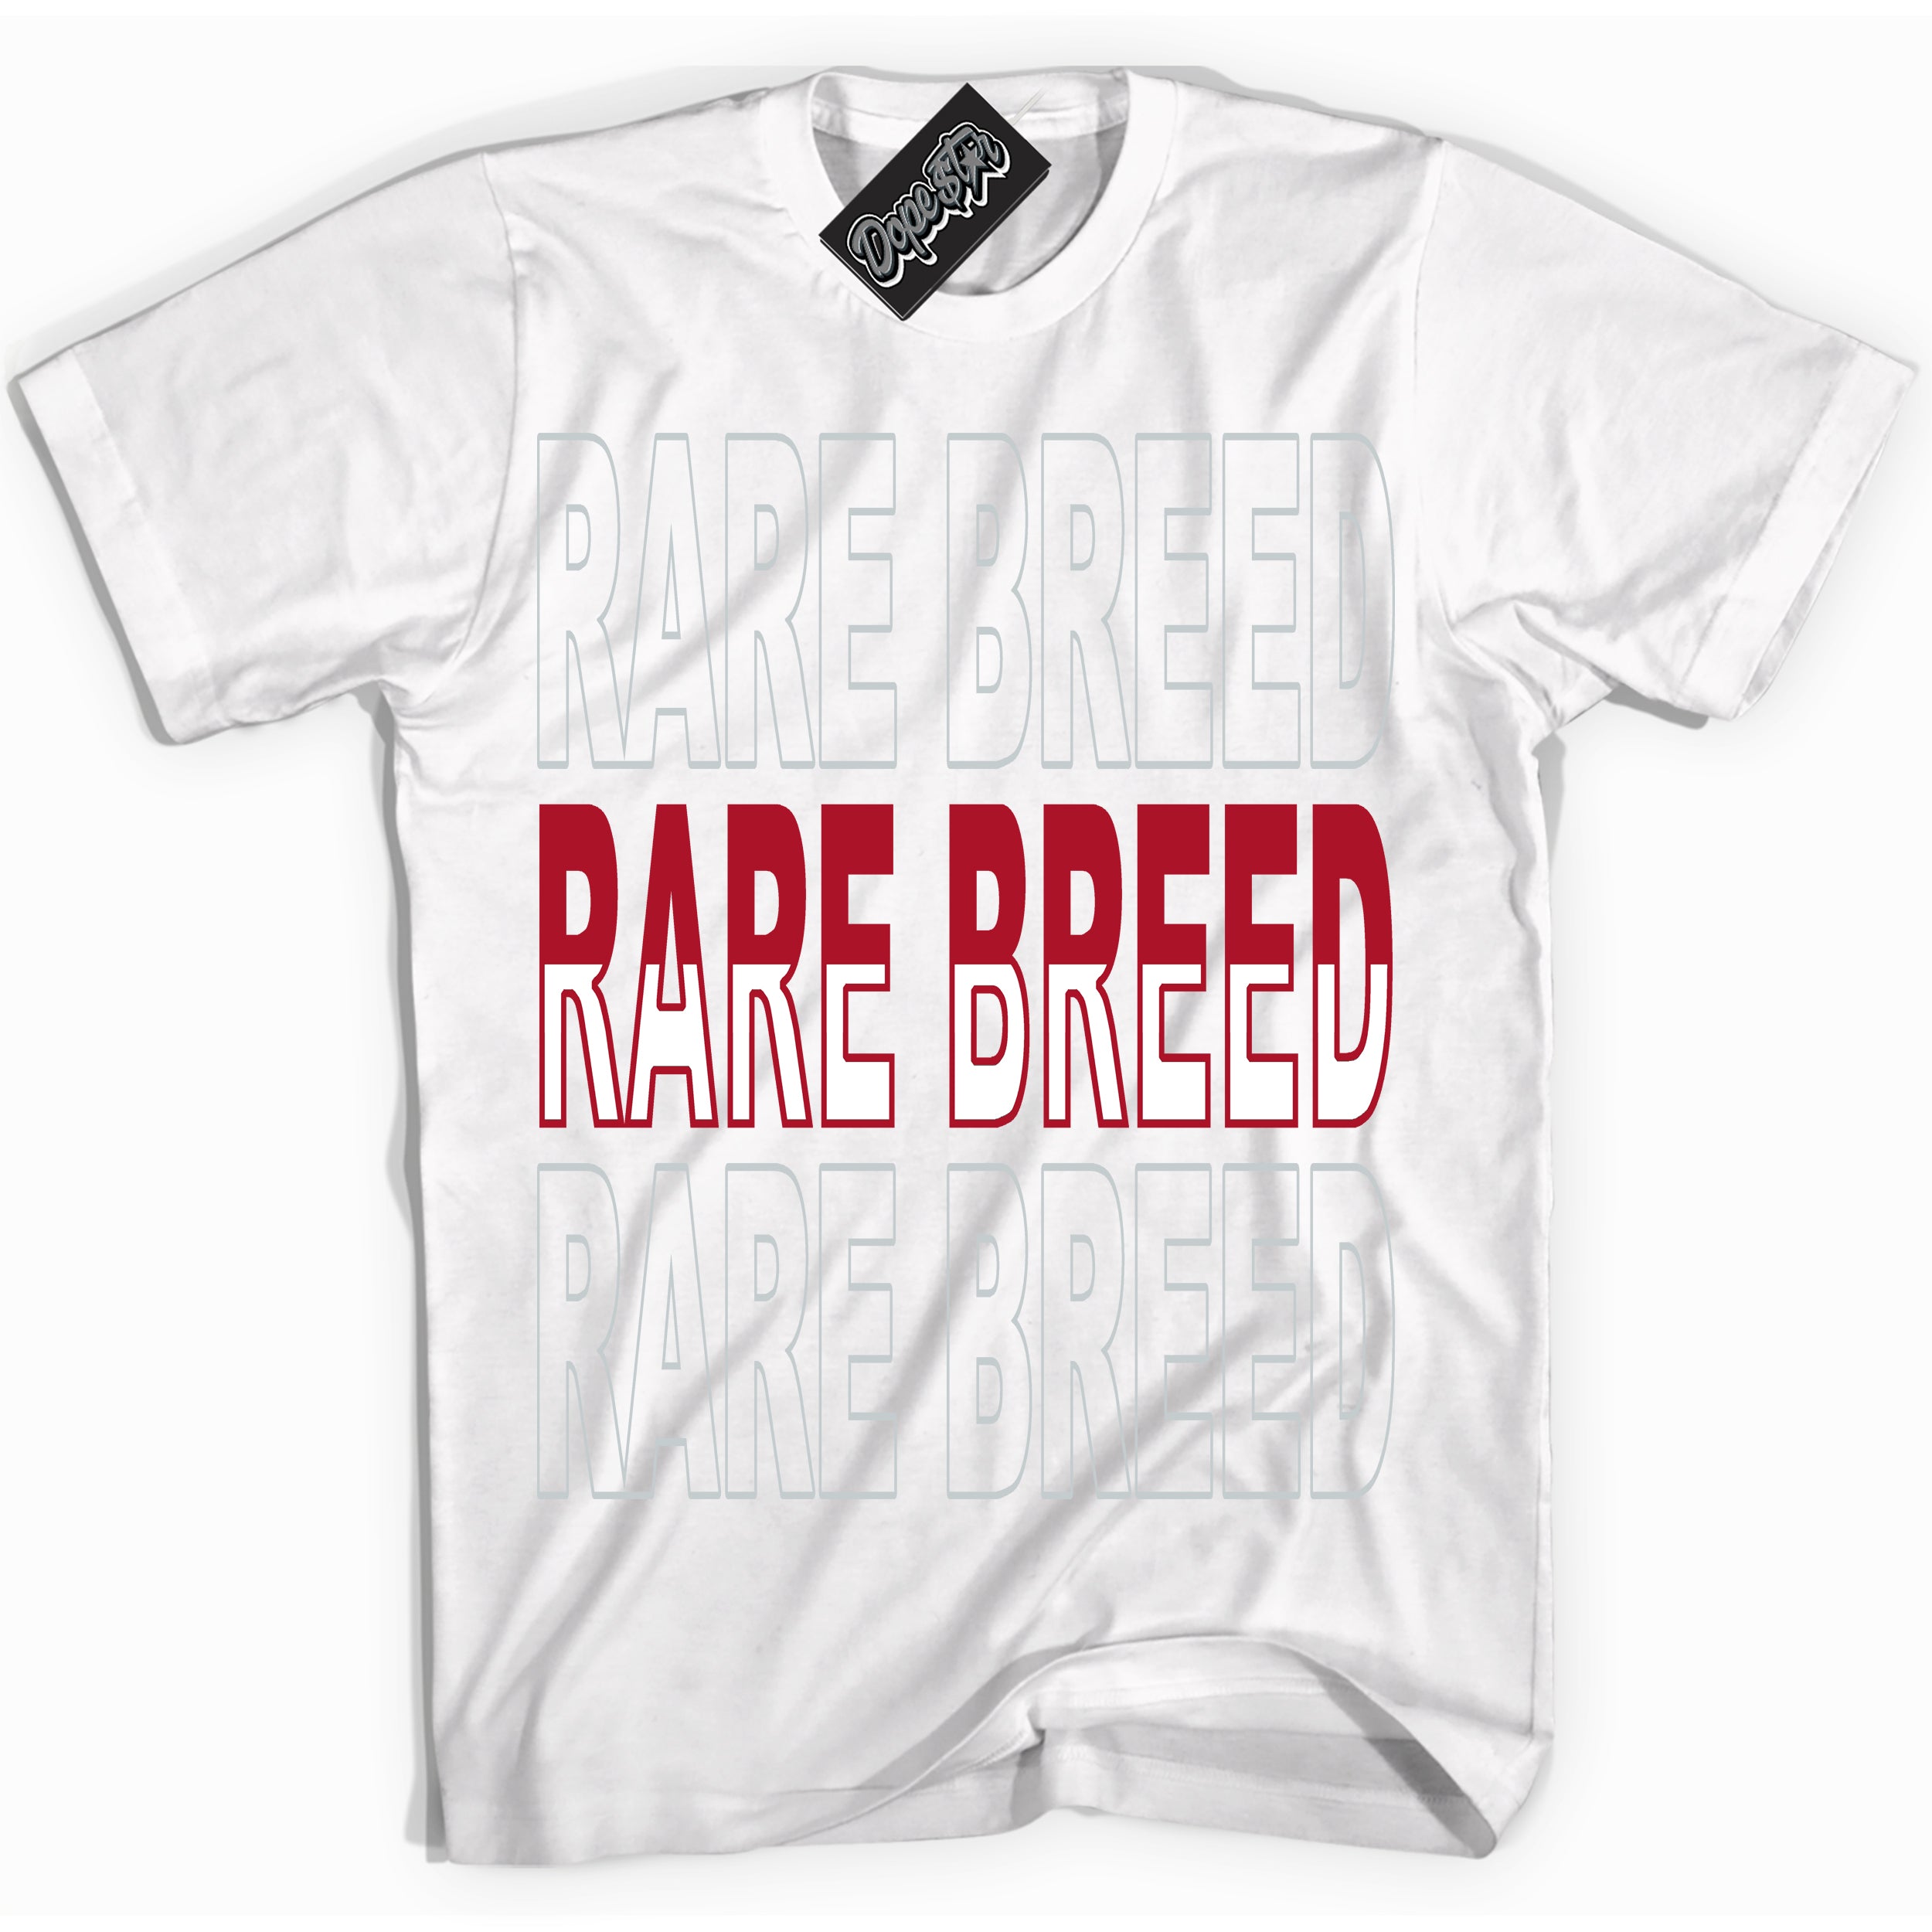 Cool White Shirt with “ Rare Breed” design that perfectly matches Reverse Ultraman Sneakers.